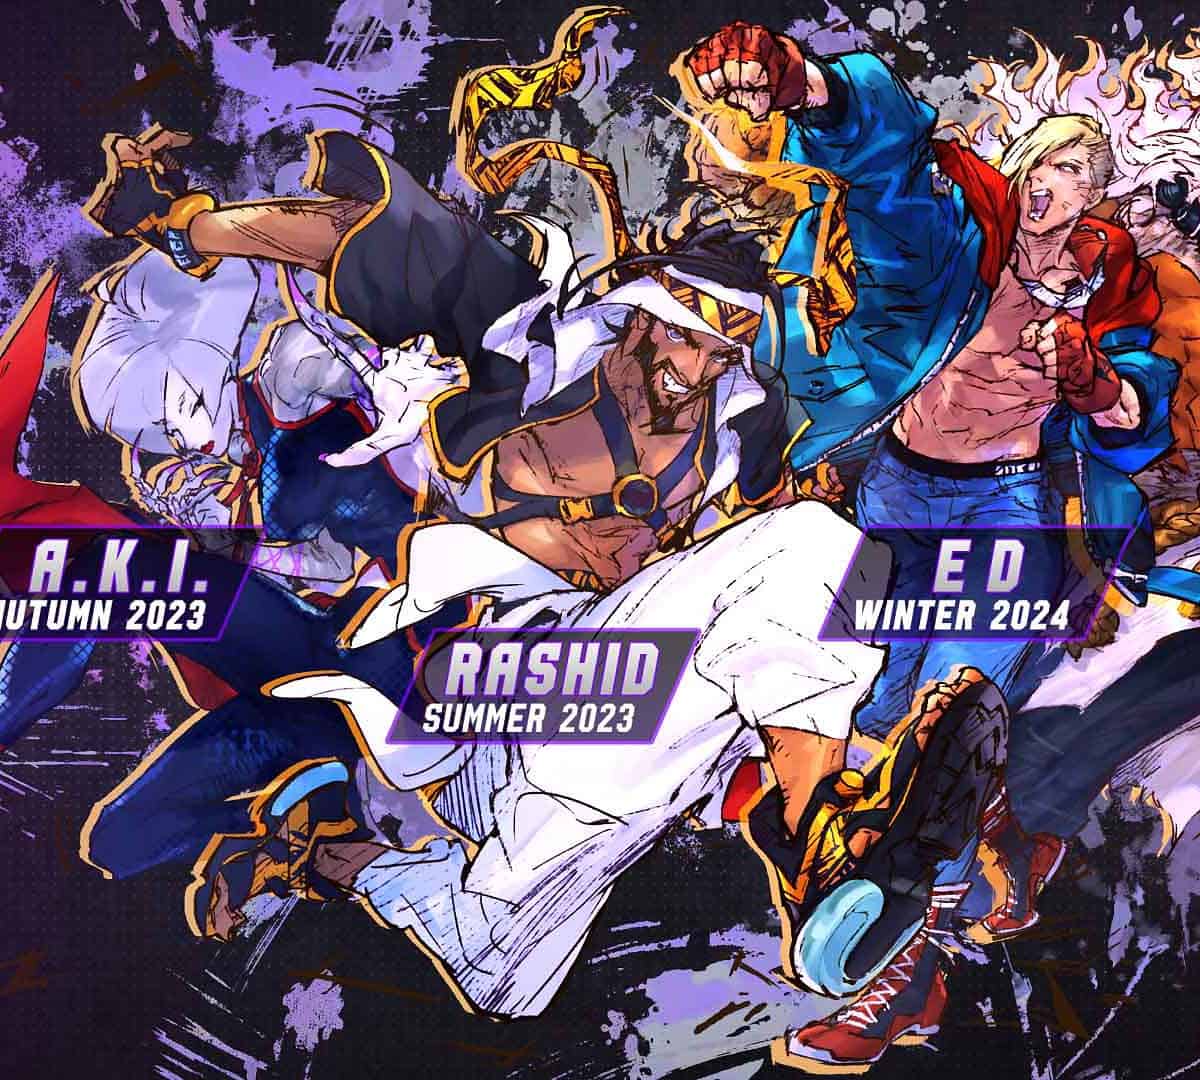 Street Fighter 6’s first year of DLC confirmed with Rashid, A.K.I., Ed and Akuma